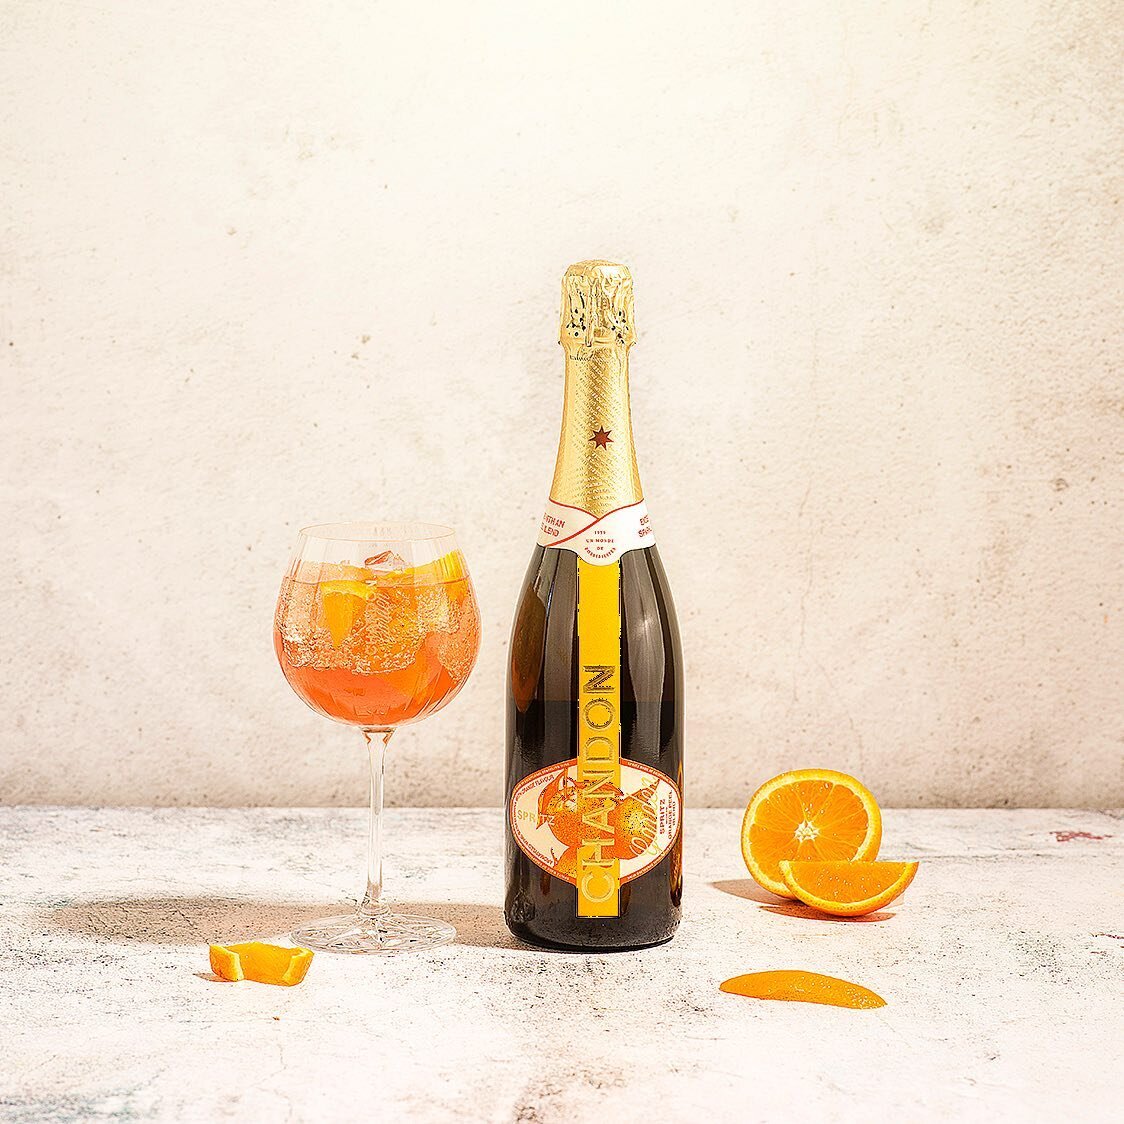 Looking forward to some spring weather at the end of this week . 
This drink is perfect for sunny weather. 

#chandongardenspritz #drinks #champagne #liquidphotography #oranges #productphotography #drinksphotography